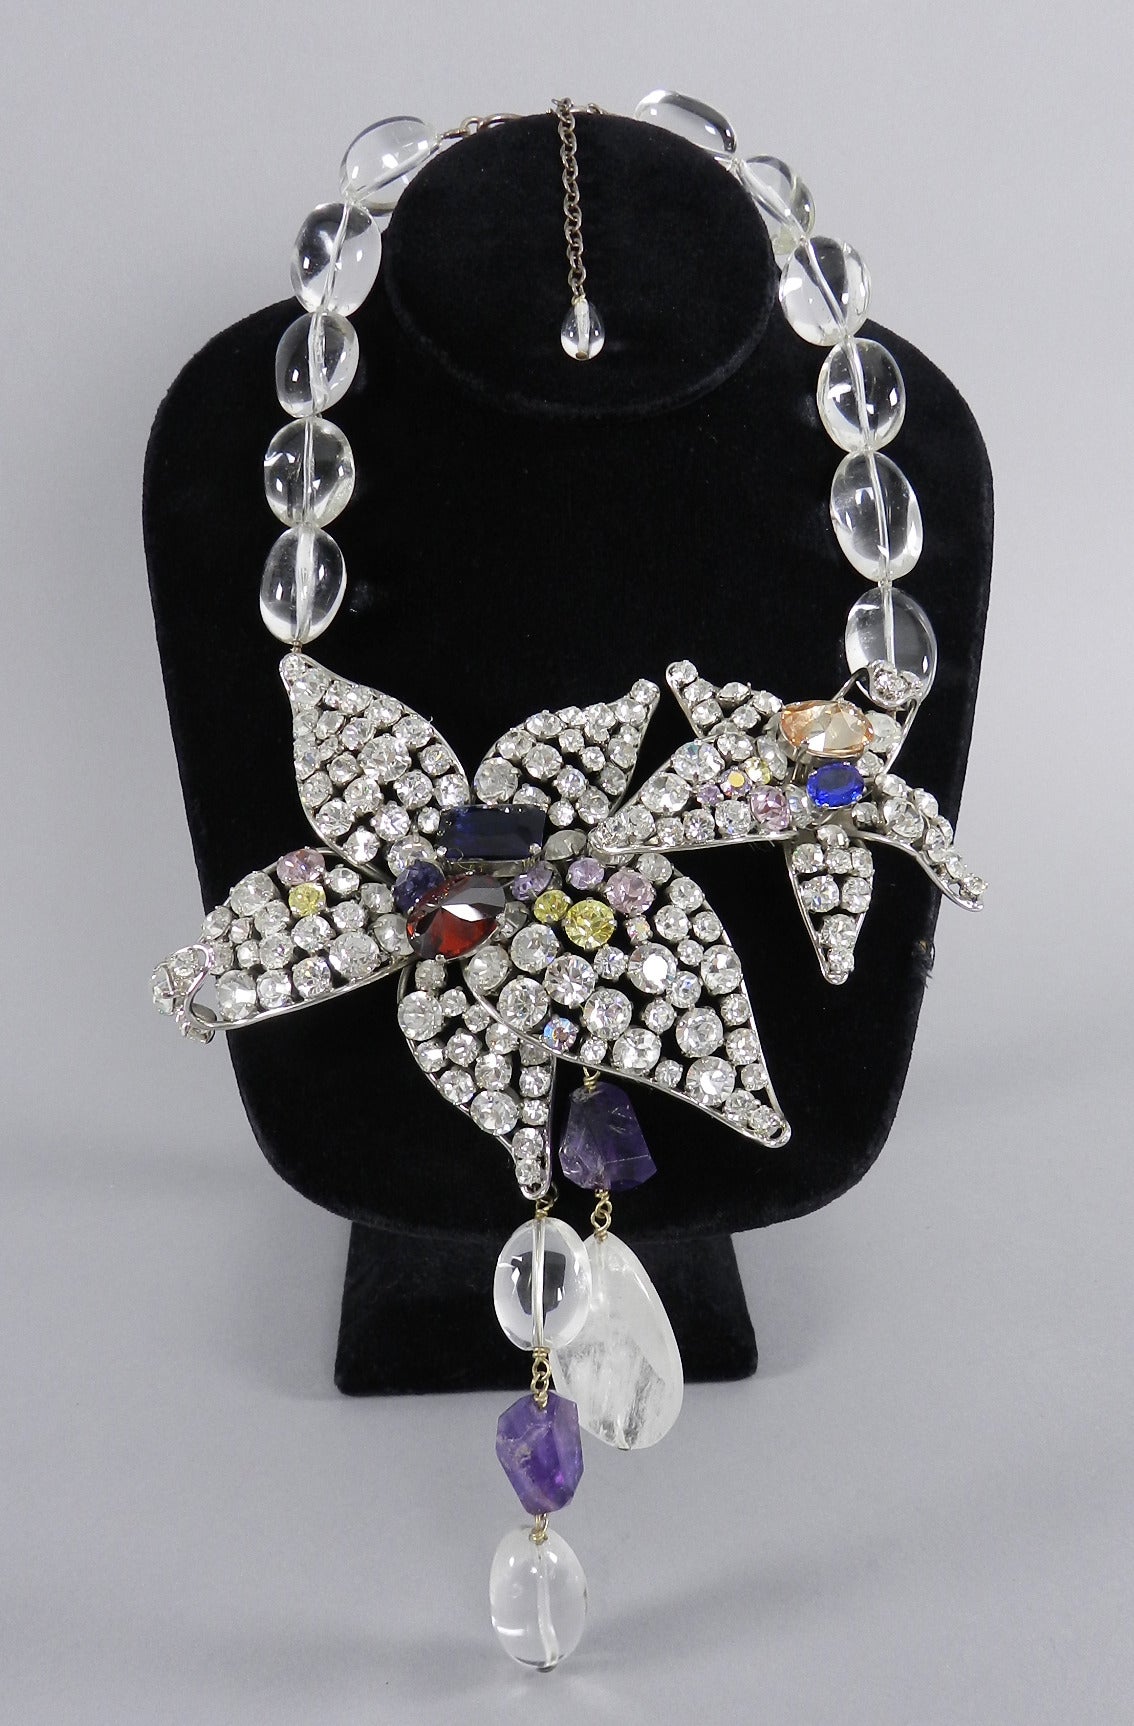 Philipe Ferrandis Paris large rhinestone star statement necklace. Amethyst and rock crystal beads. Clear rhinestones set in silvertone metal with red, blue, topaz, purple, and yellow rhinestones. Necklace adjusts from 16 - 19".  

We ship